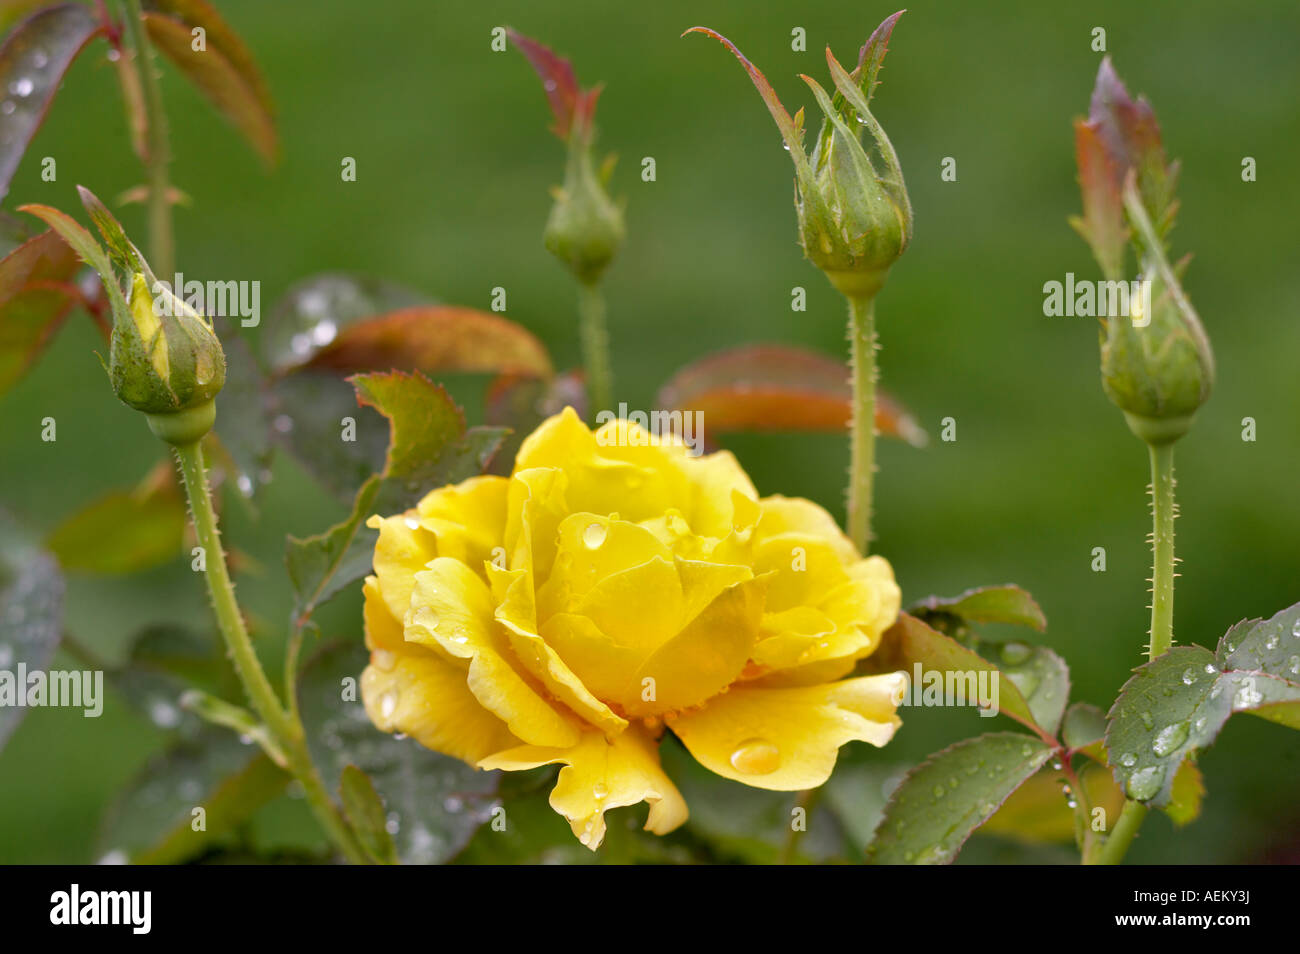 Midas Touch rose Heirloom Gardens Florida Banque D'Images